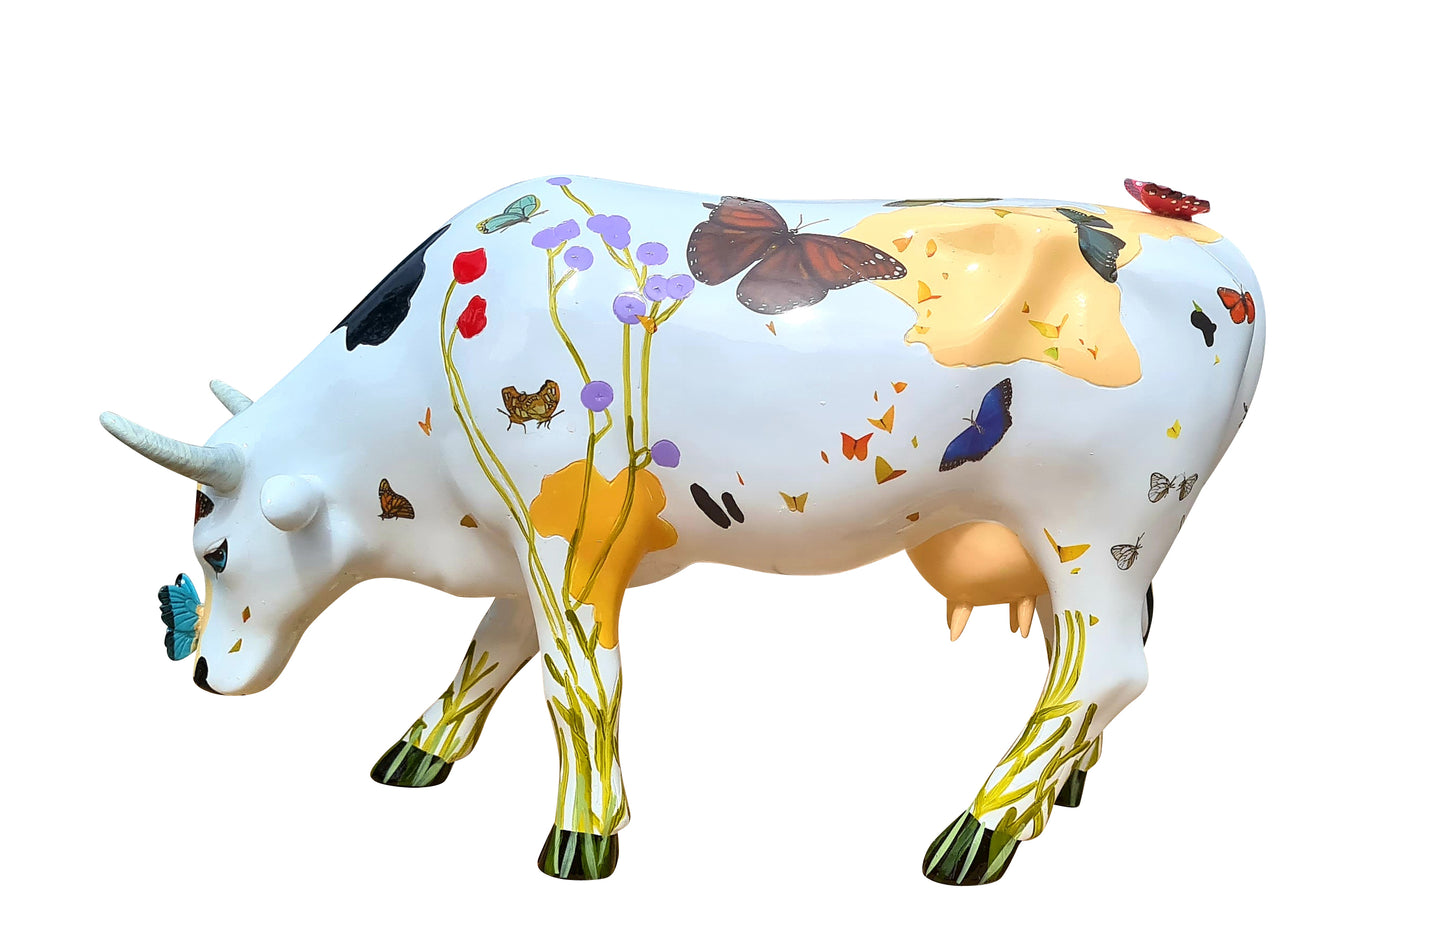 Cow Parade cow statue "Ramona", length 12 inches (30.5 centimeters)